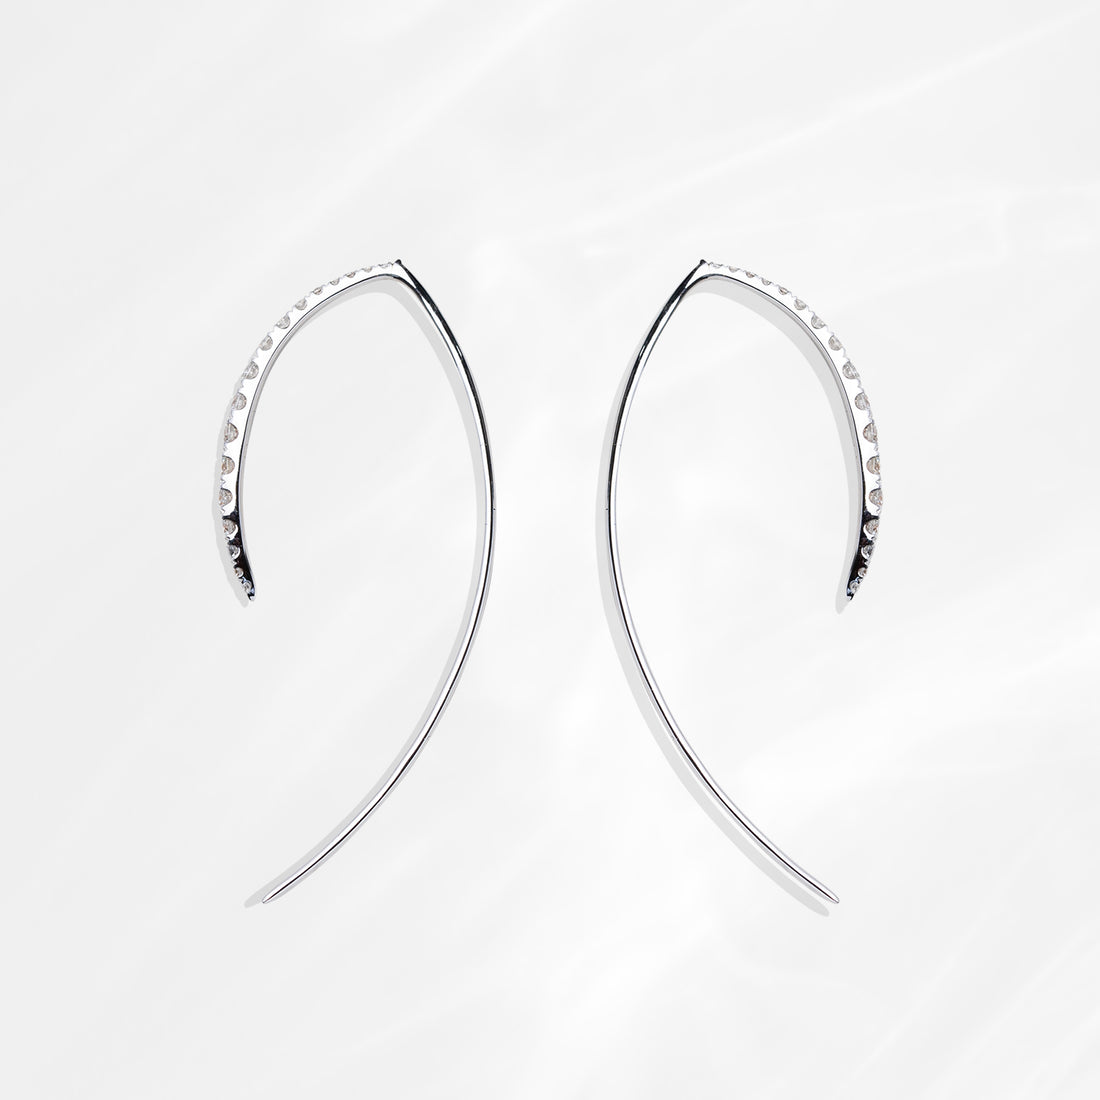 Two ILA SODHANI Khale Earrings shown laid on their sides with the diamonds facing away from each other; visible from this angle is the white gold of the threader post and the edges of the diamonds set onto the fronts.